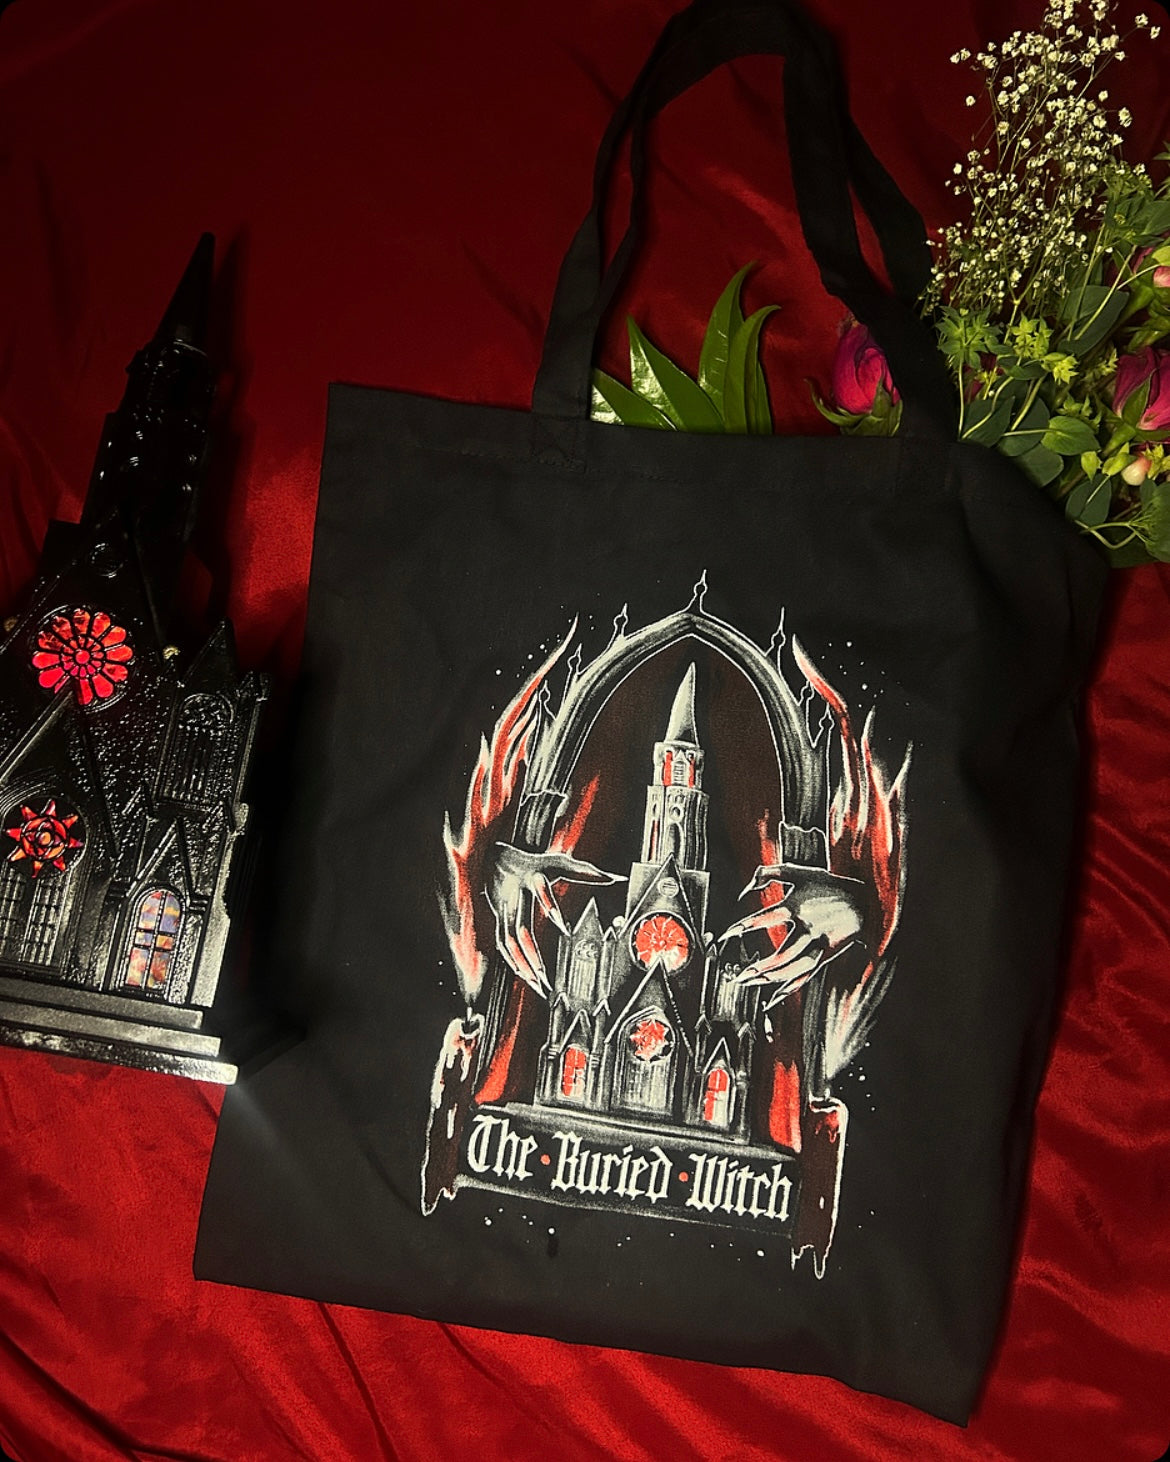 OFFICIAL 𝕿𝖍𝖊 𝕭𝖚𝖗𝖎𝖊𝖉 𝖂𝖎𝖙𝖈𝖍 Tote Bags